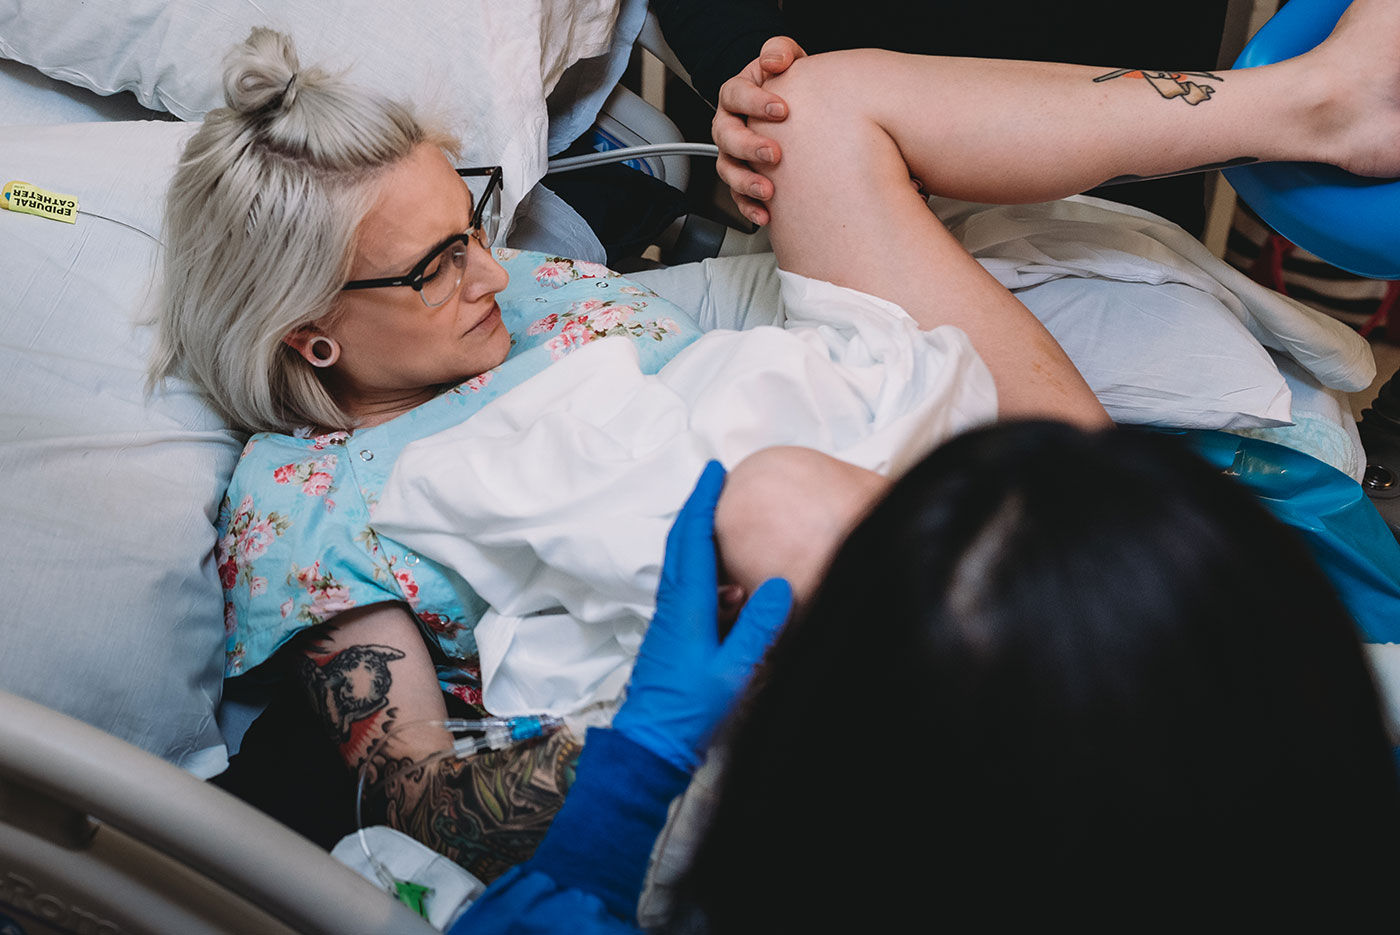 mom grabs her knees while pushing during childbirth in Portland